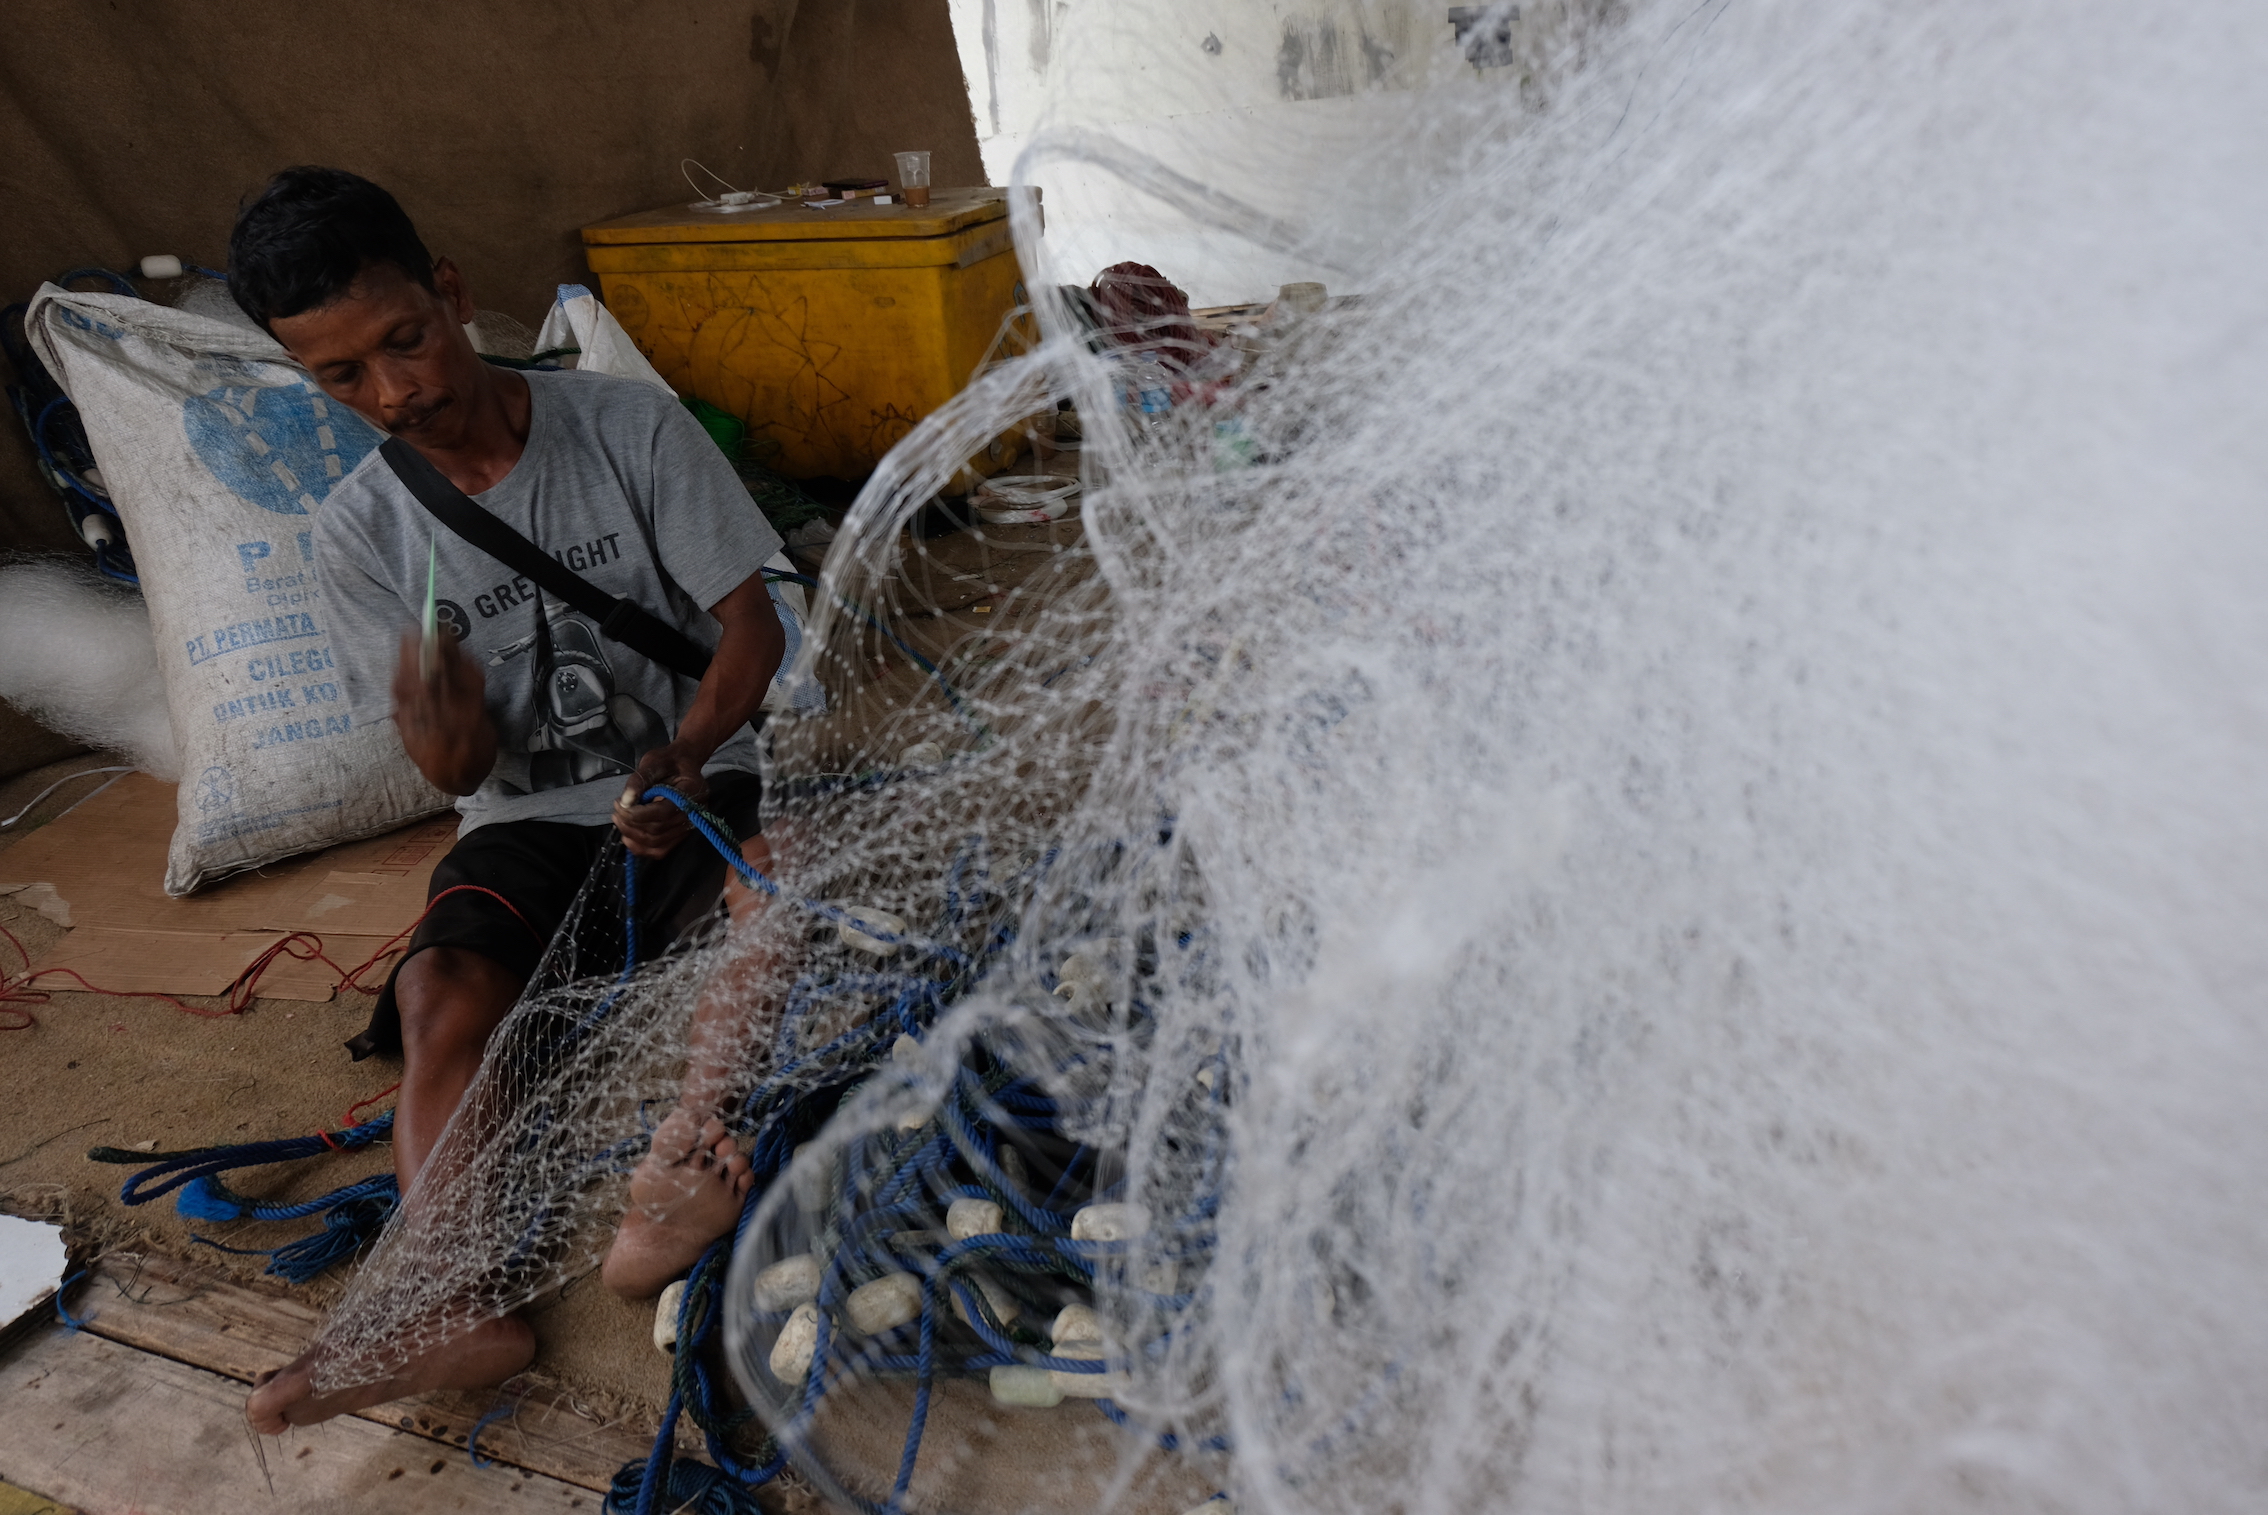 Indonesian waters are haunted by ghost net